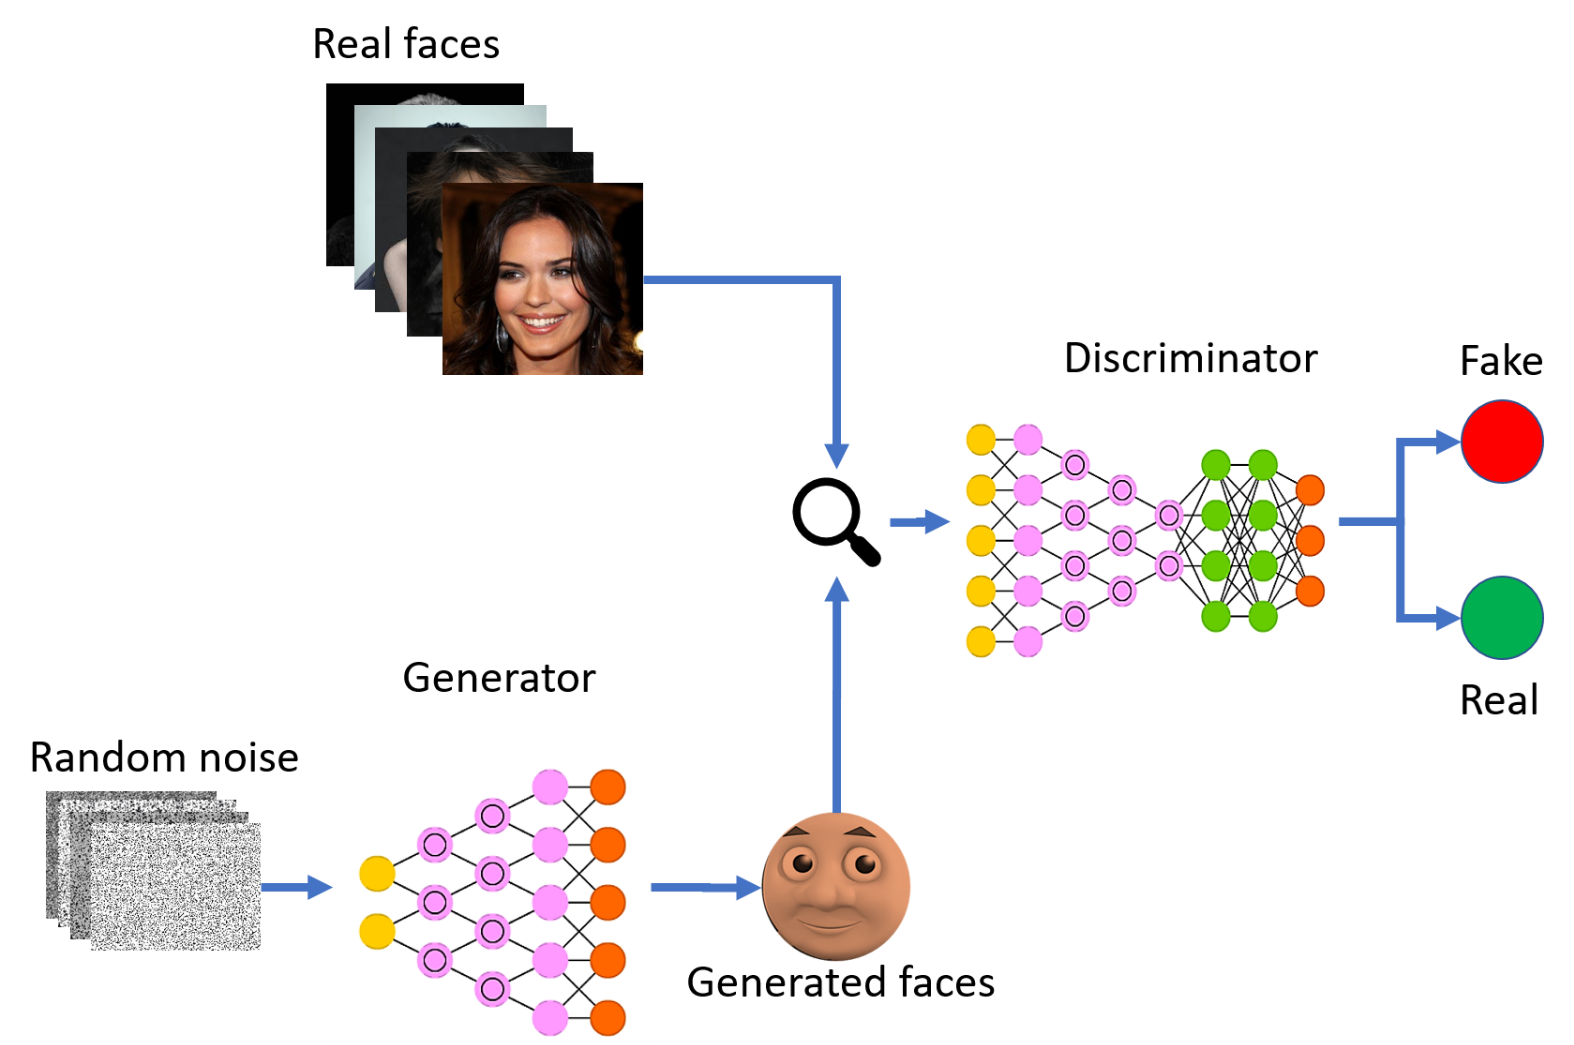 [Translate to English:] Type a name describing your image. Generative Adversarial Network for image generation.